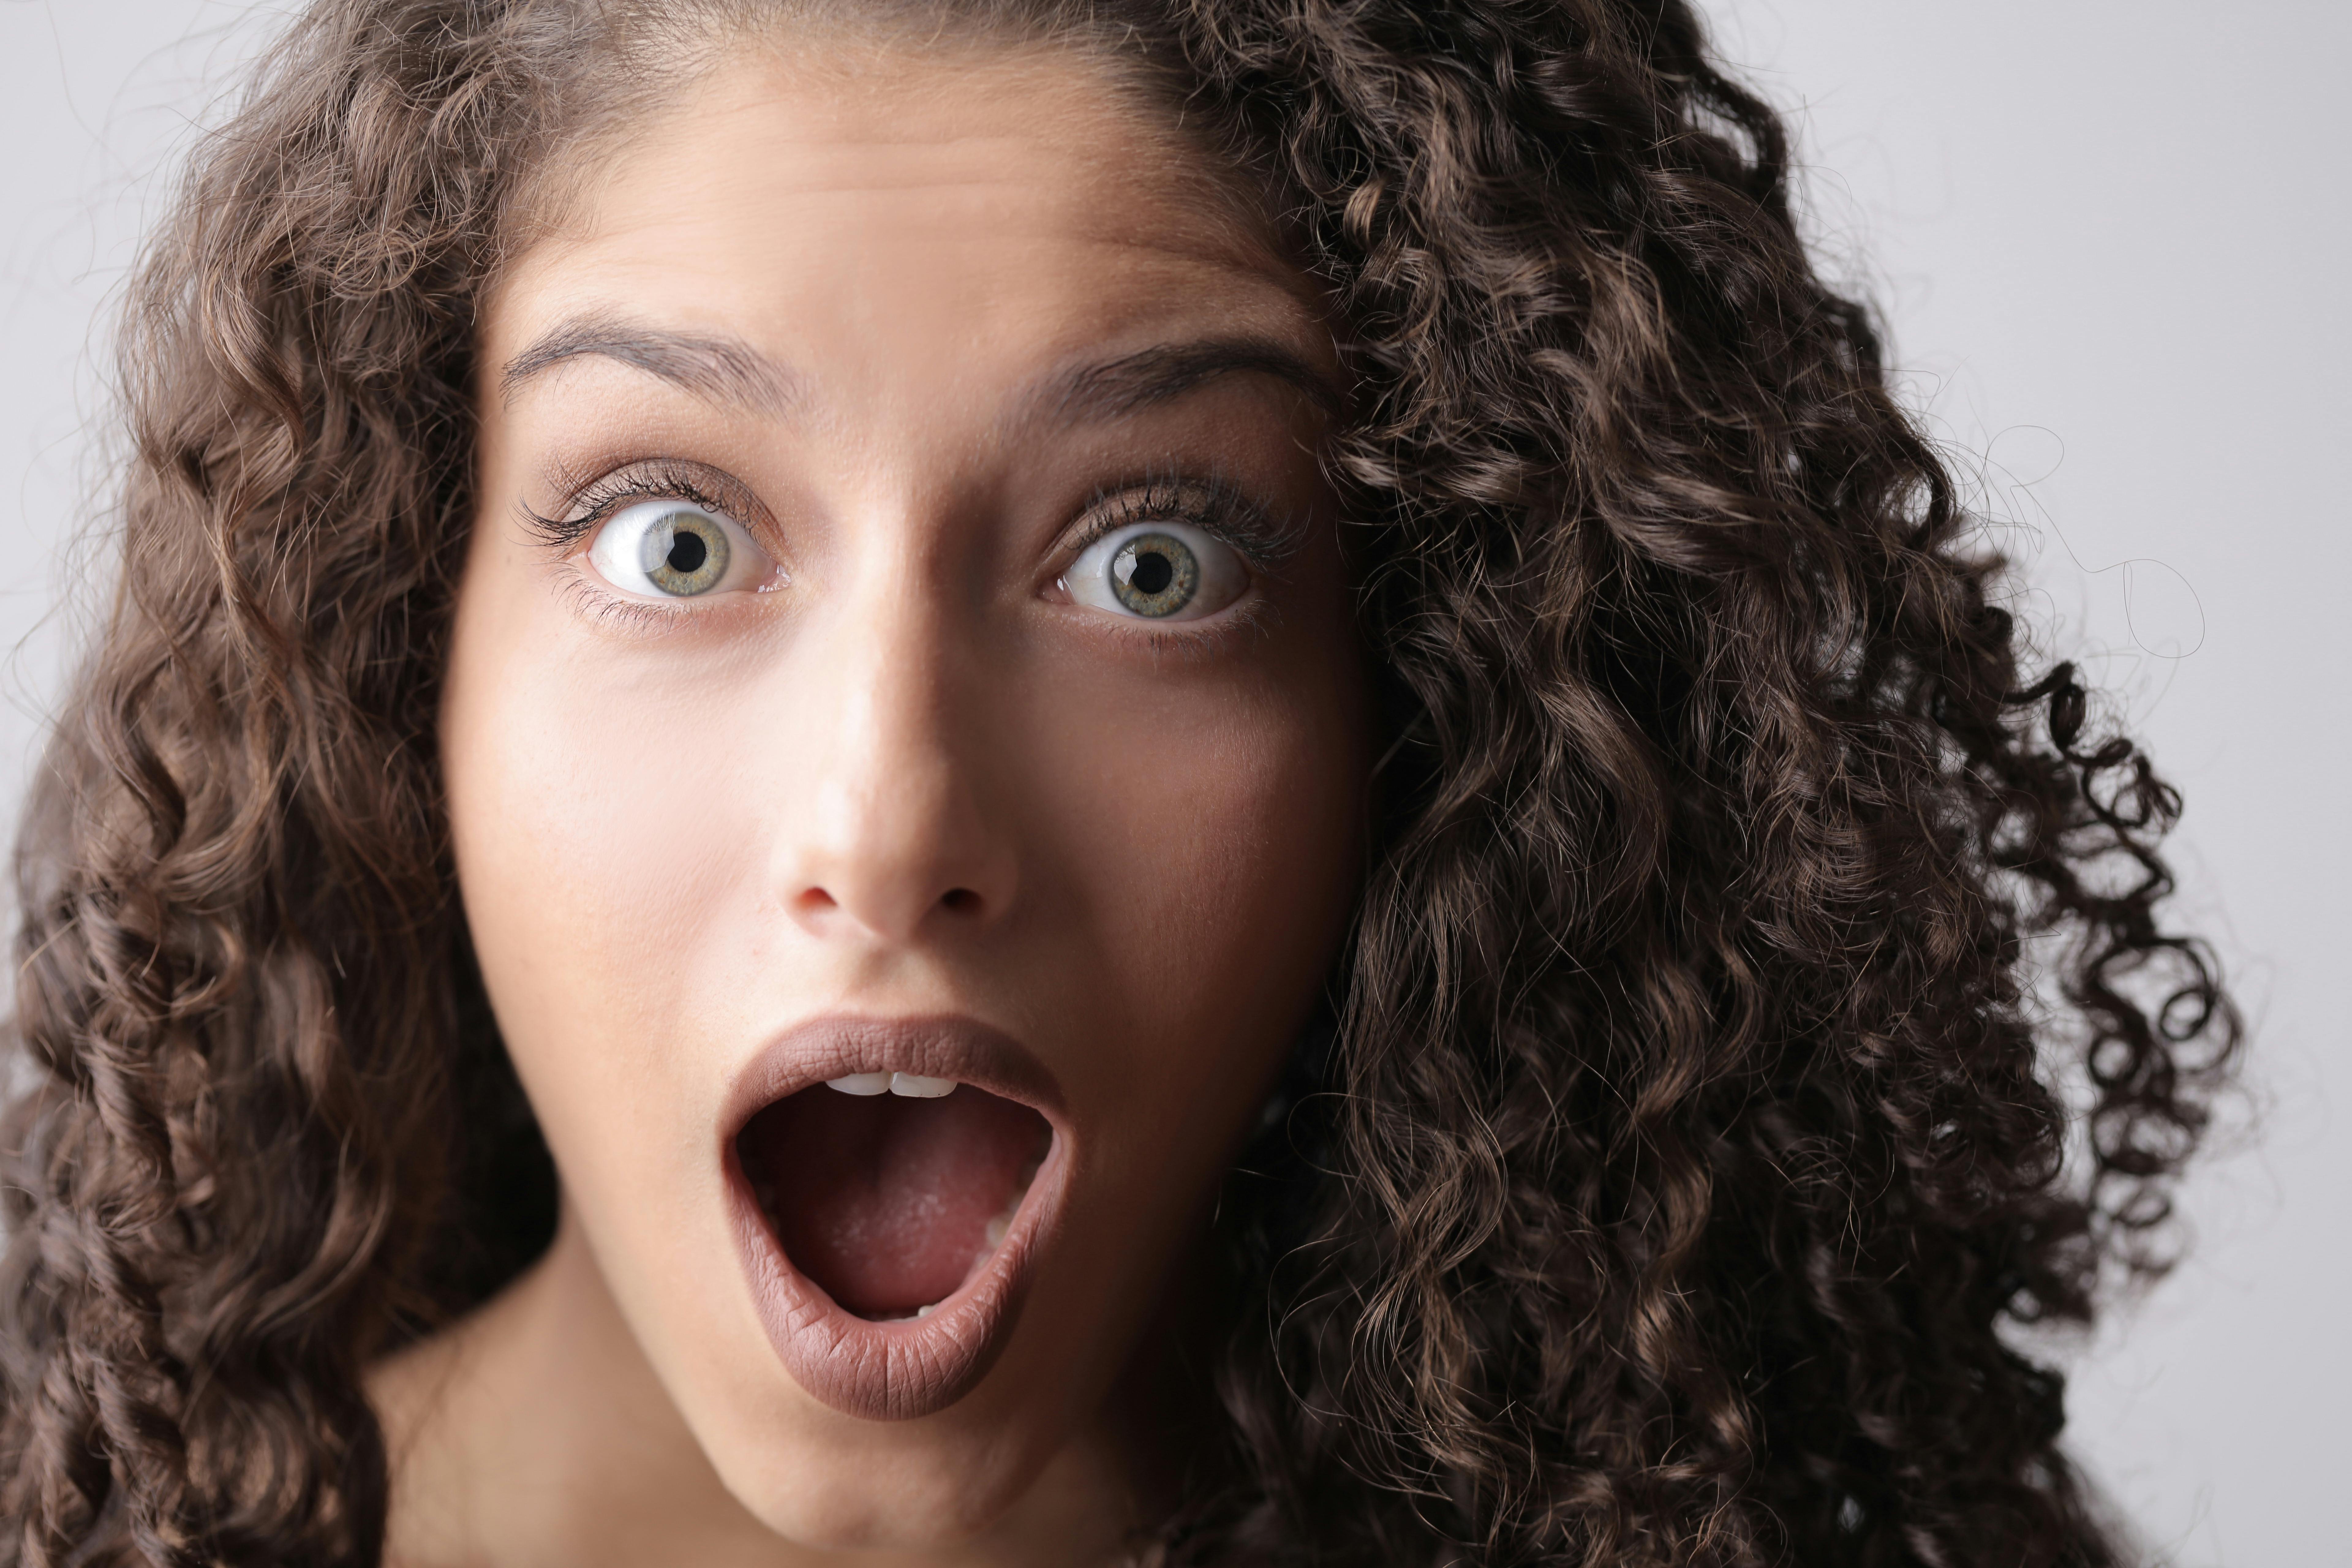 A surprised woman with her mouth wide open | Source: Pexels